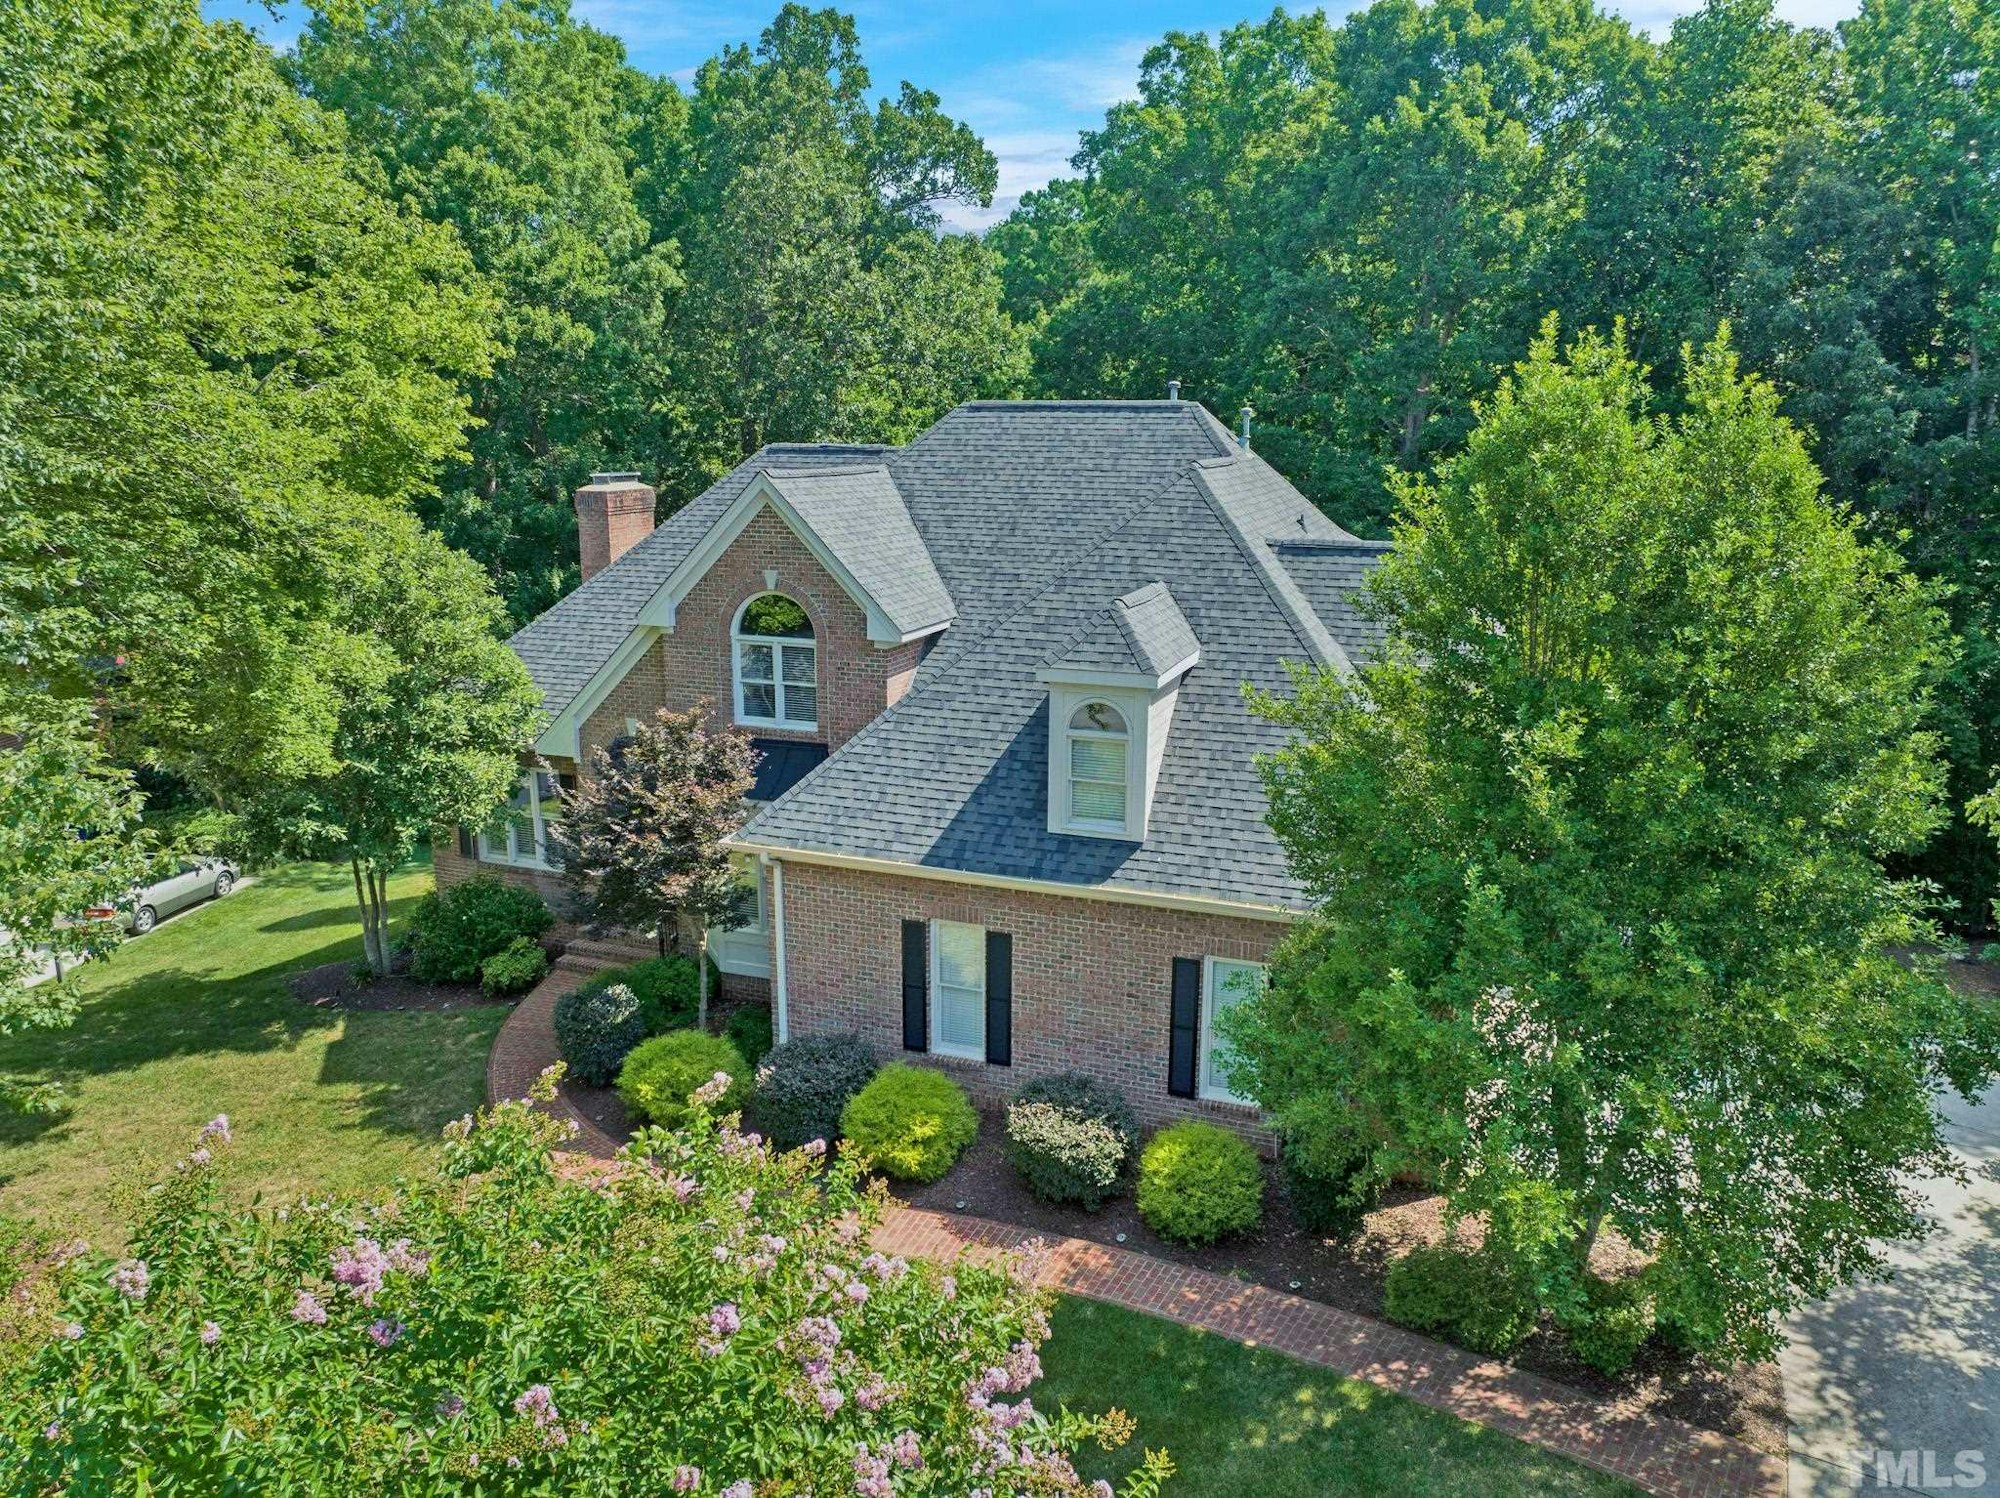 Photo 1 of 52 - 8704 Bell Grove Way, Raleigh, NC 27615